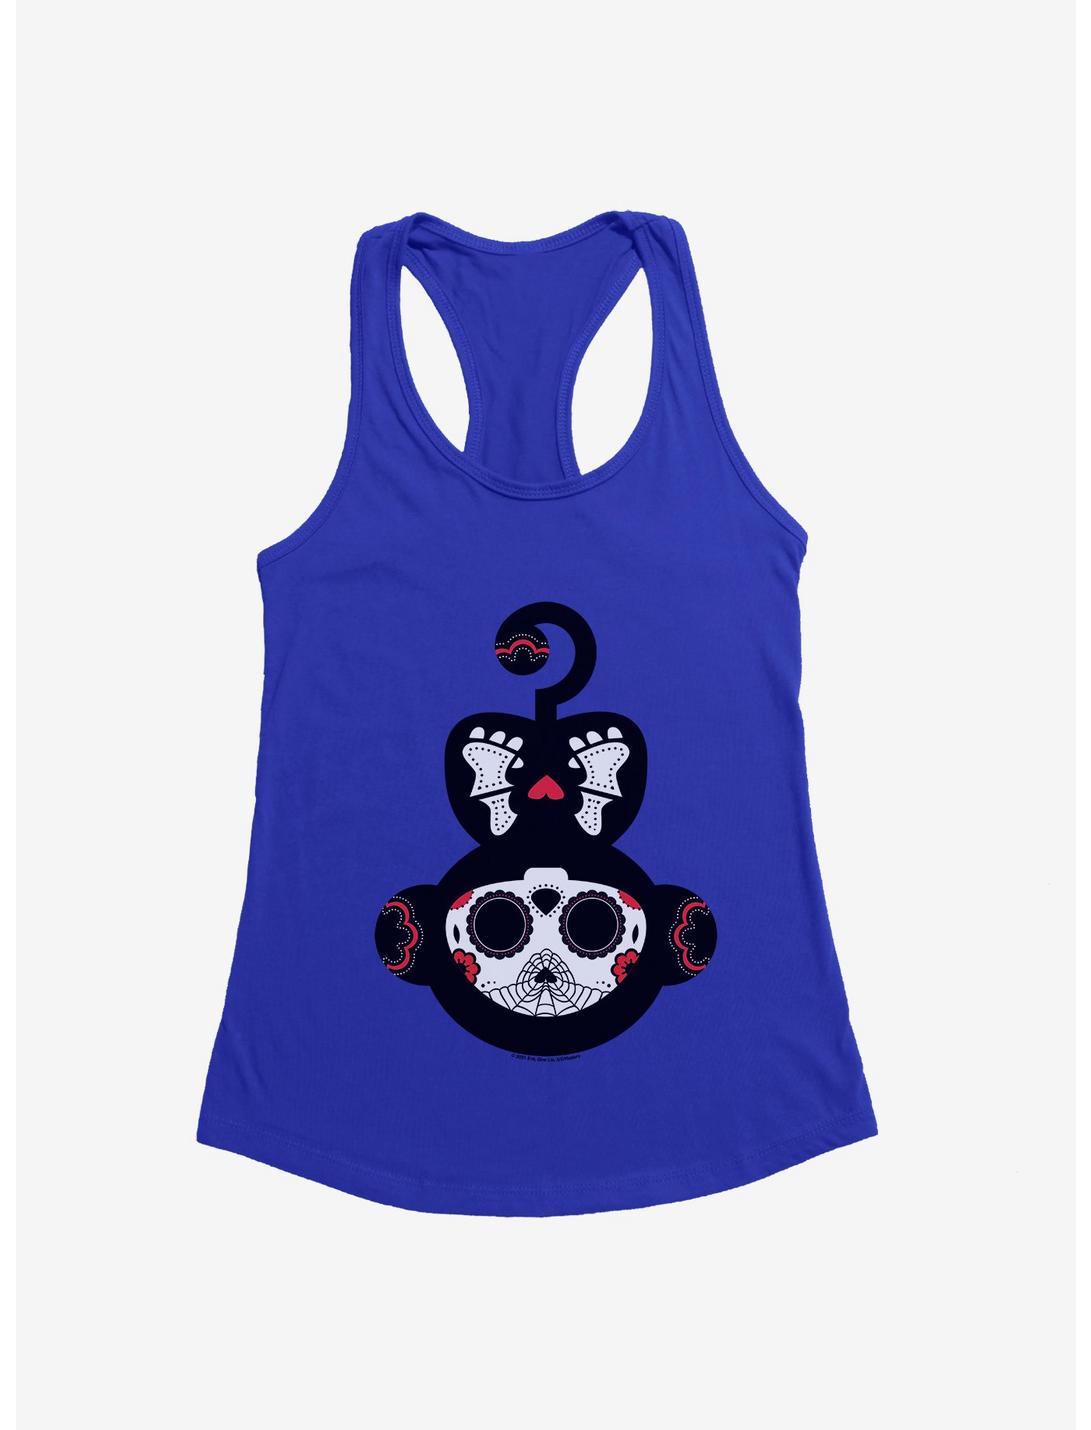 Skelanimals Day of the Dead Marcy Girls Tank, ROYAL, hi-res